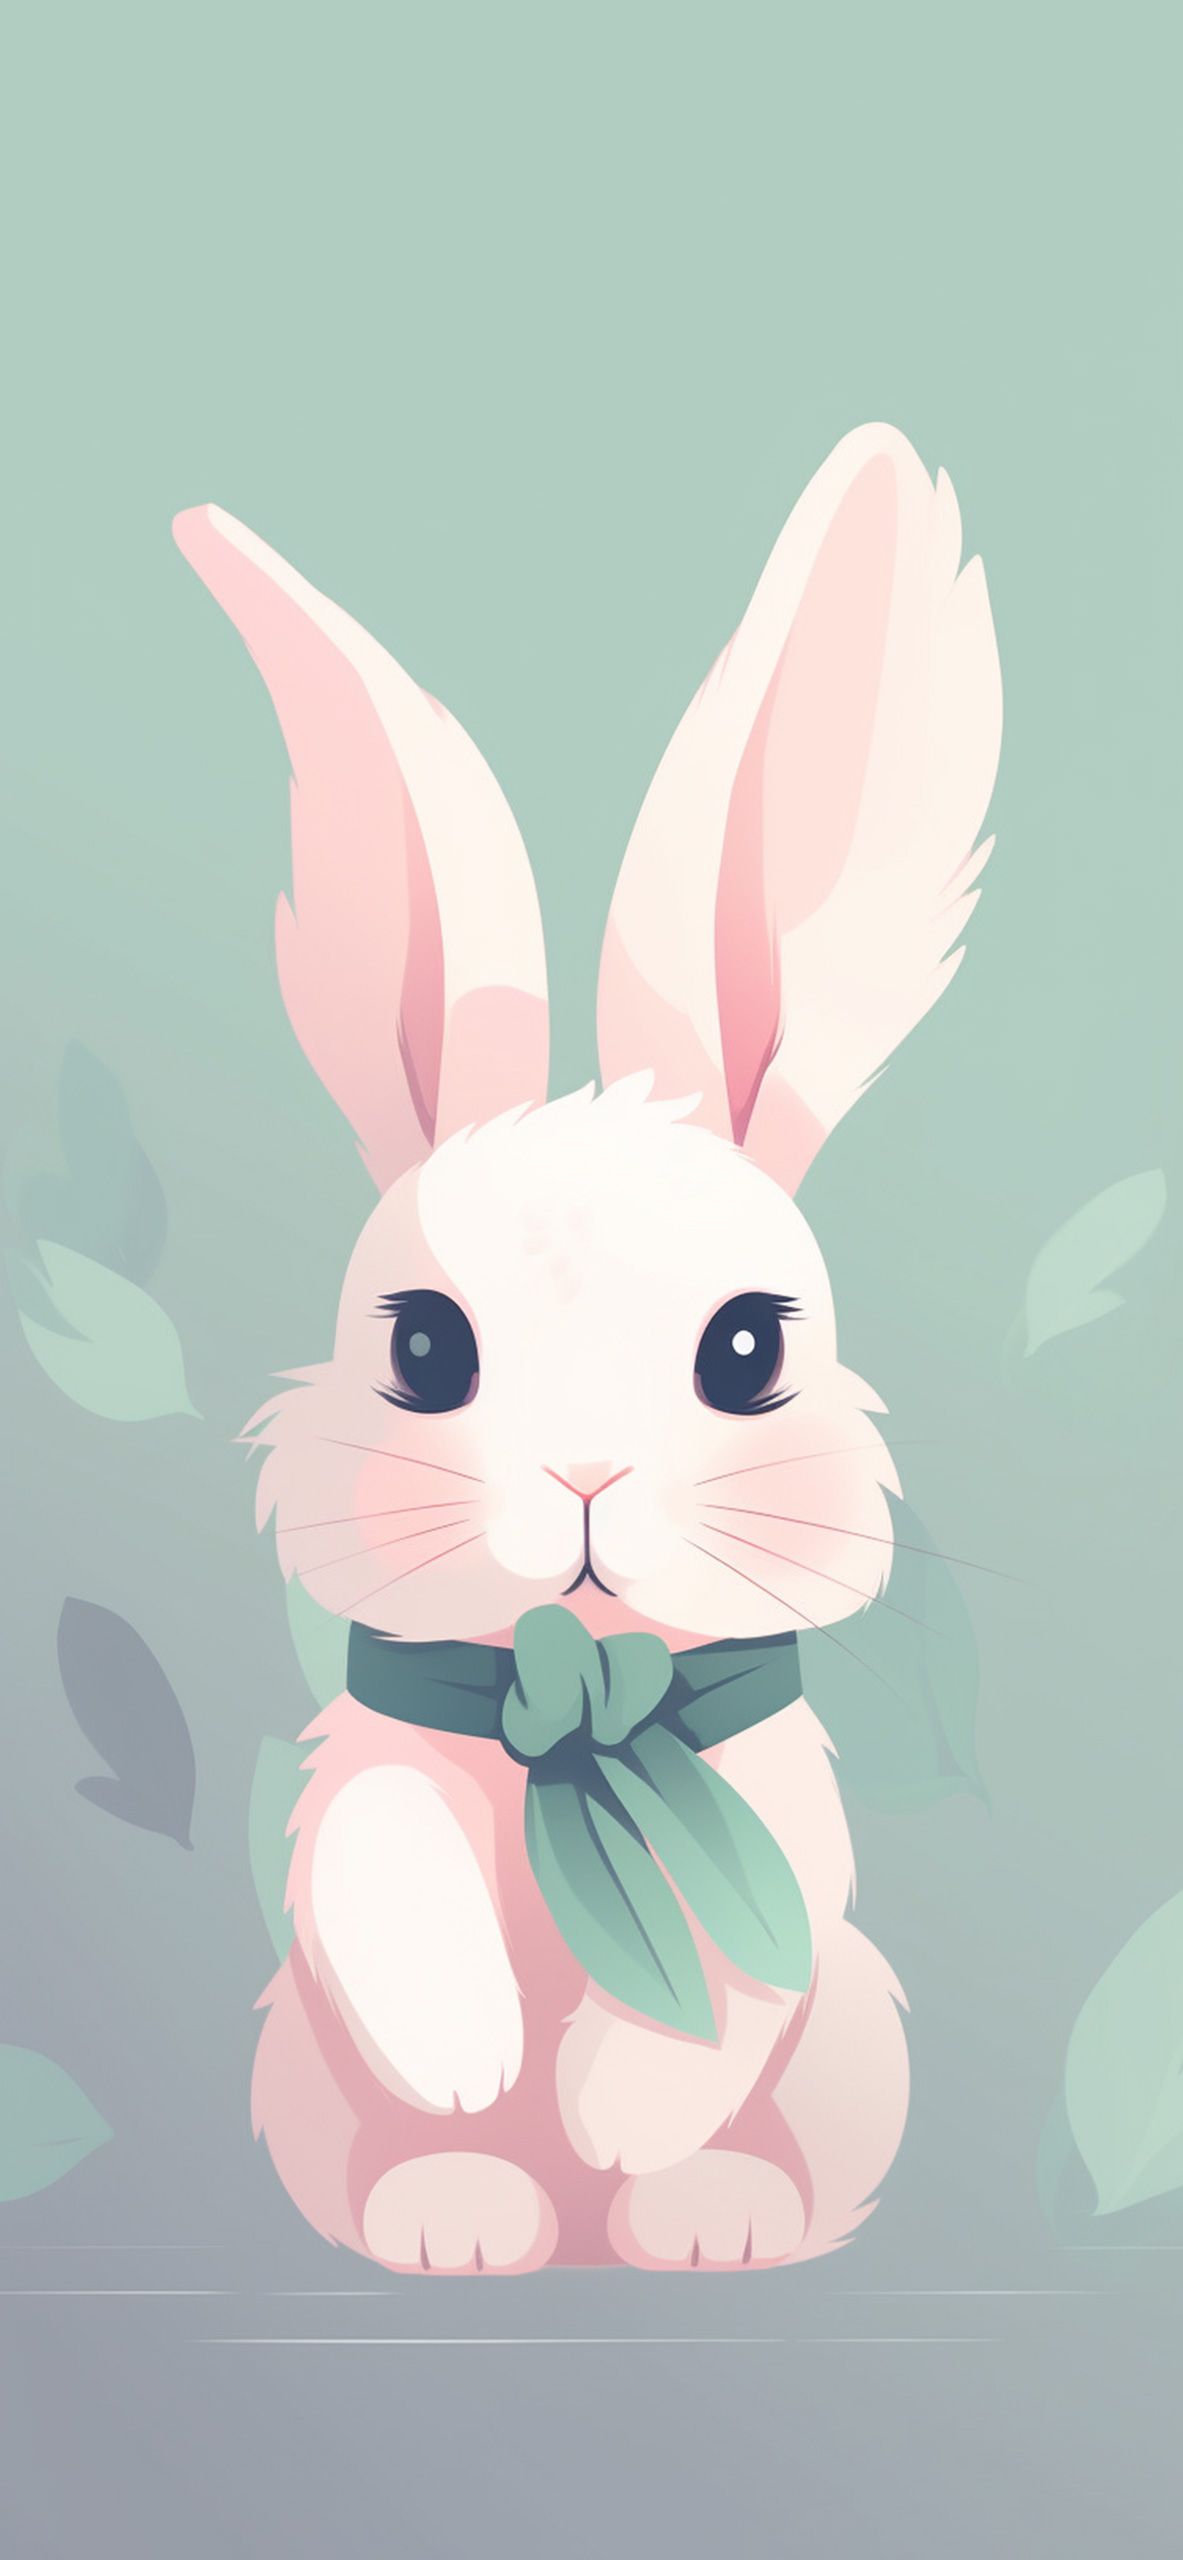 A white rabbit with a green bow sitting on a gray rock. - Cute iPhone